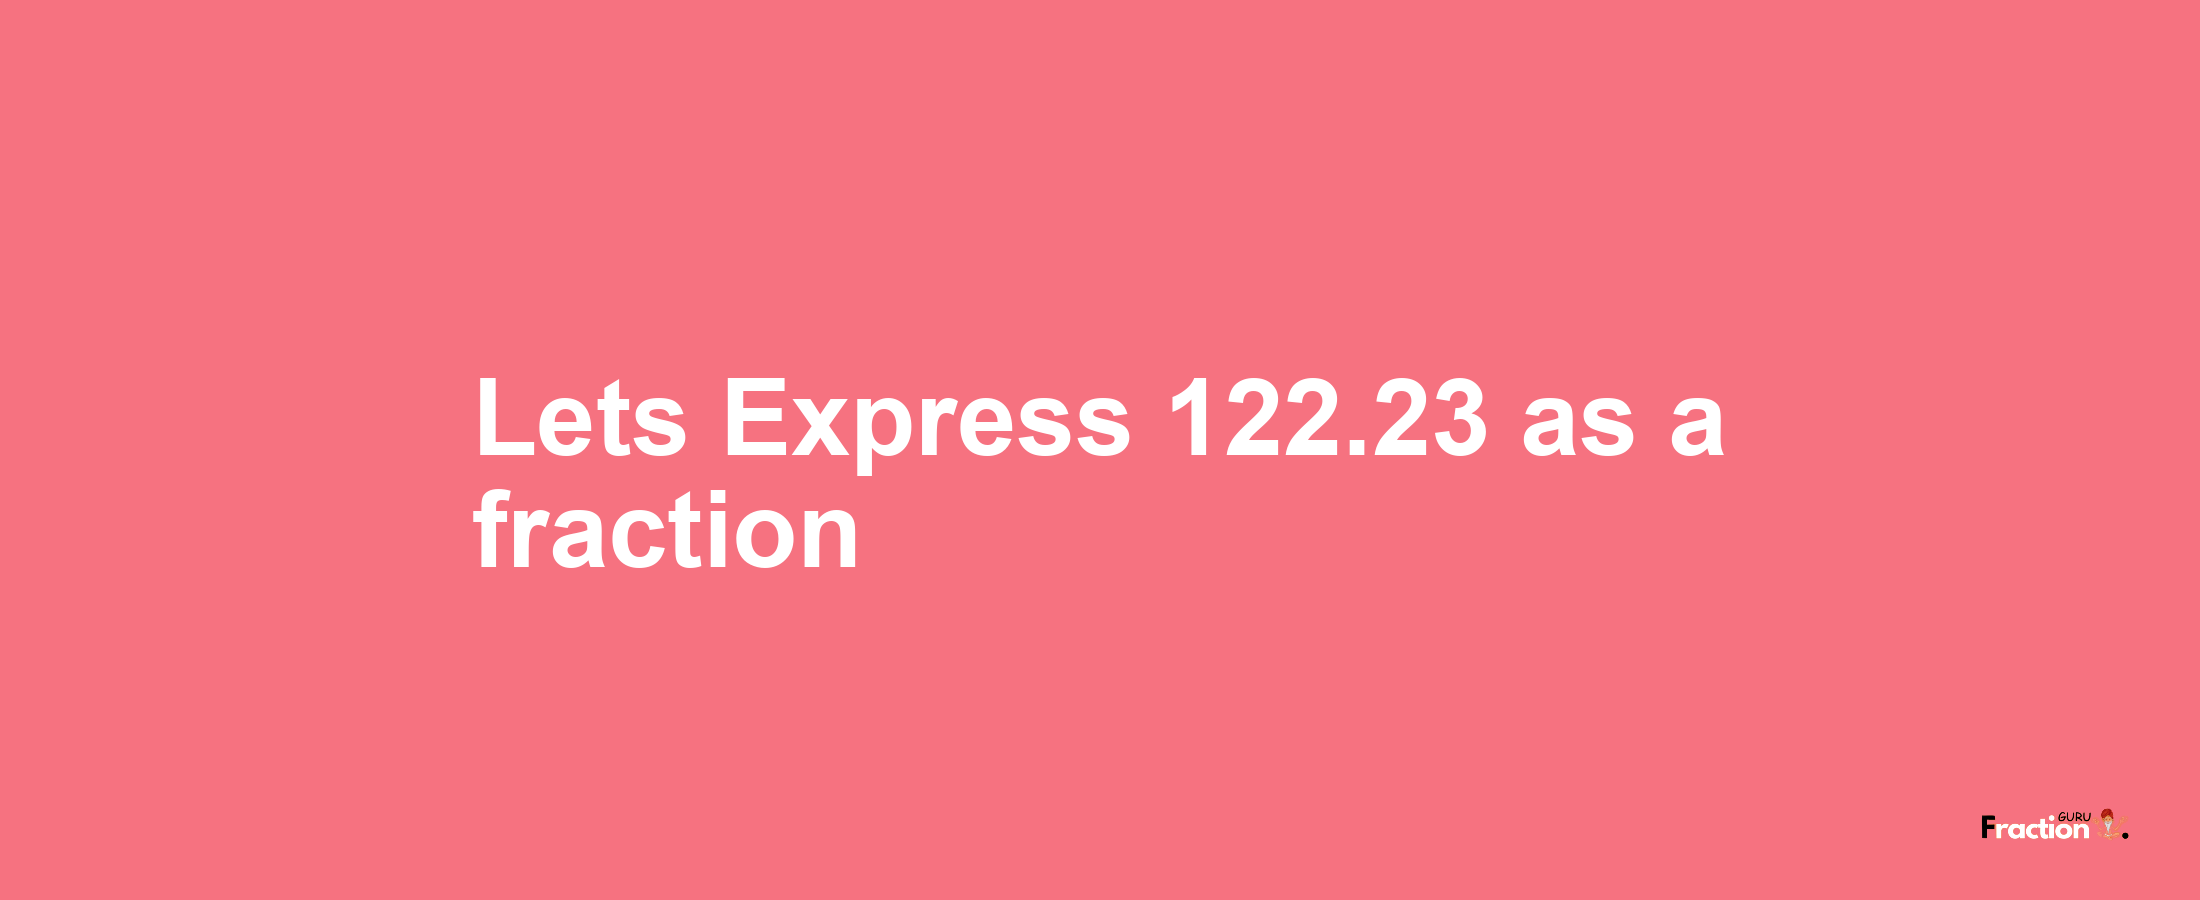 Lets Express 122.23 as afraction